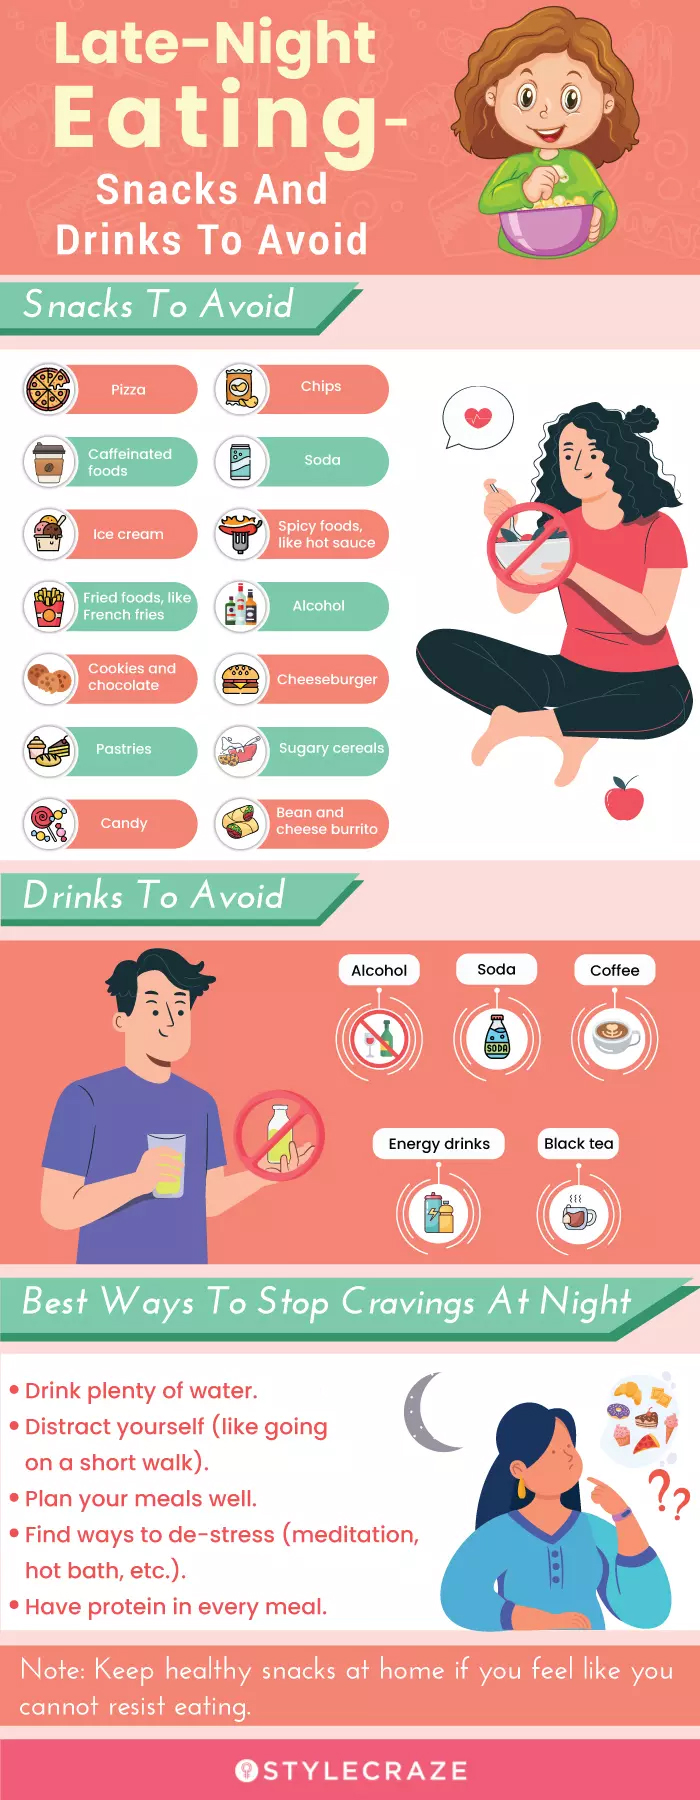 late-night eating snacks and drinks to avoid (infographic)